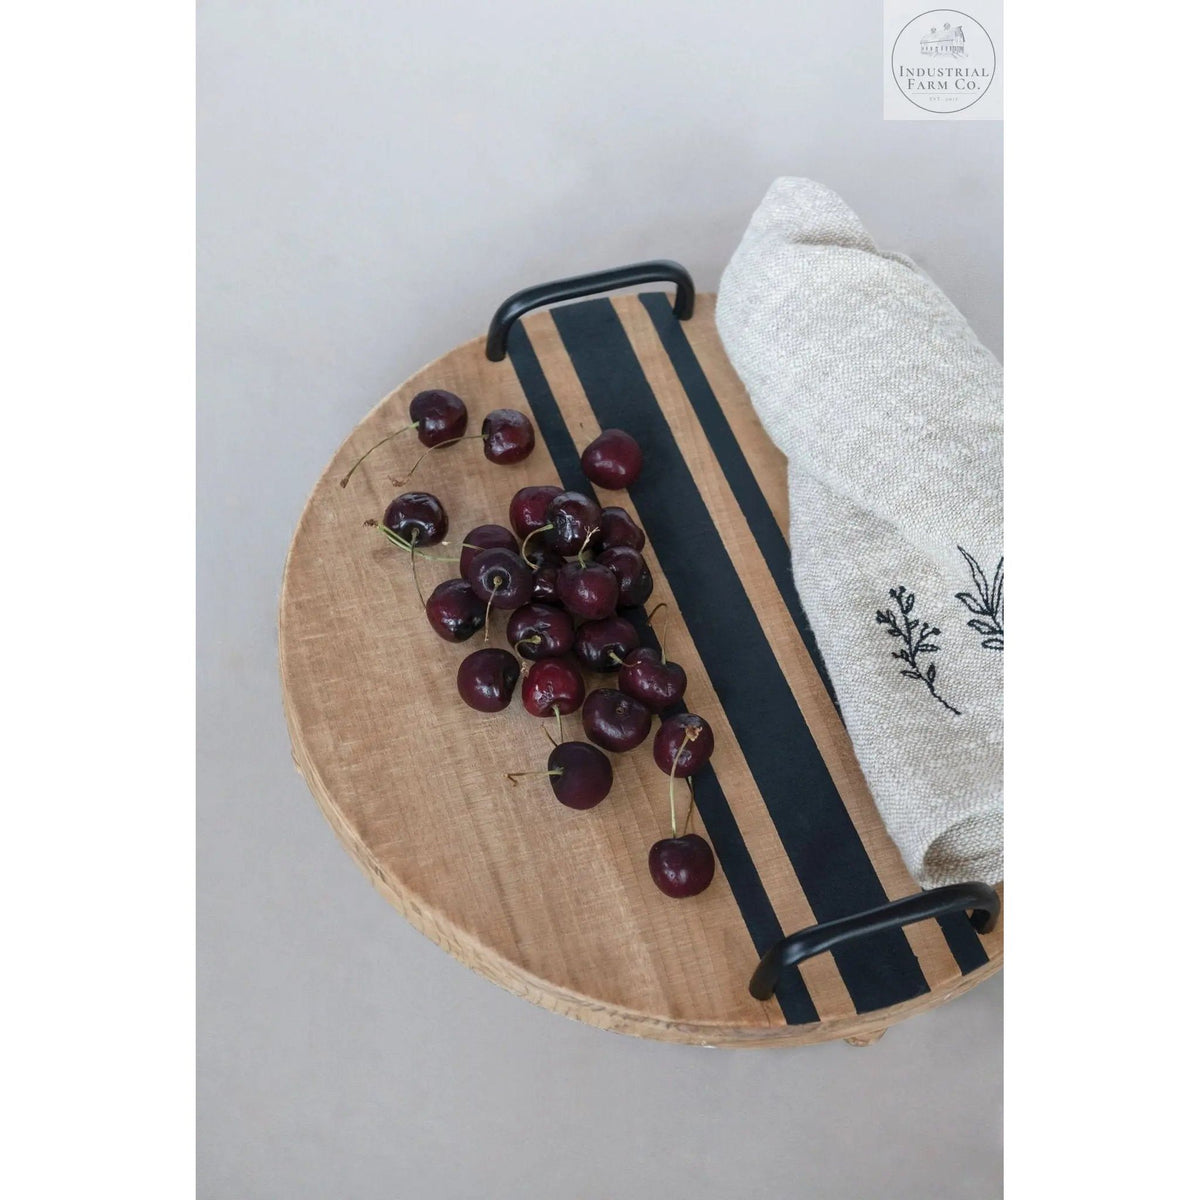 The Strider Decorative Tray  Default Title   | Industrial Farm Co